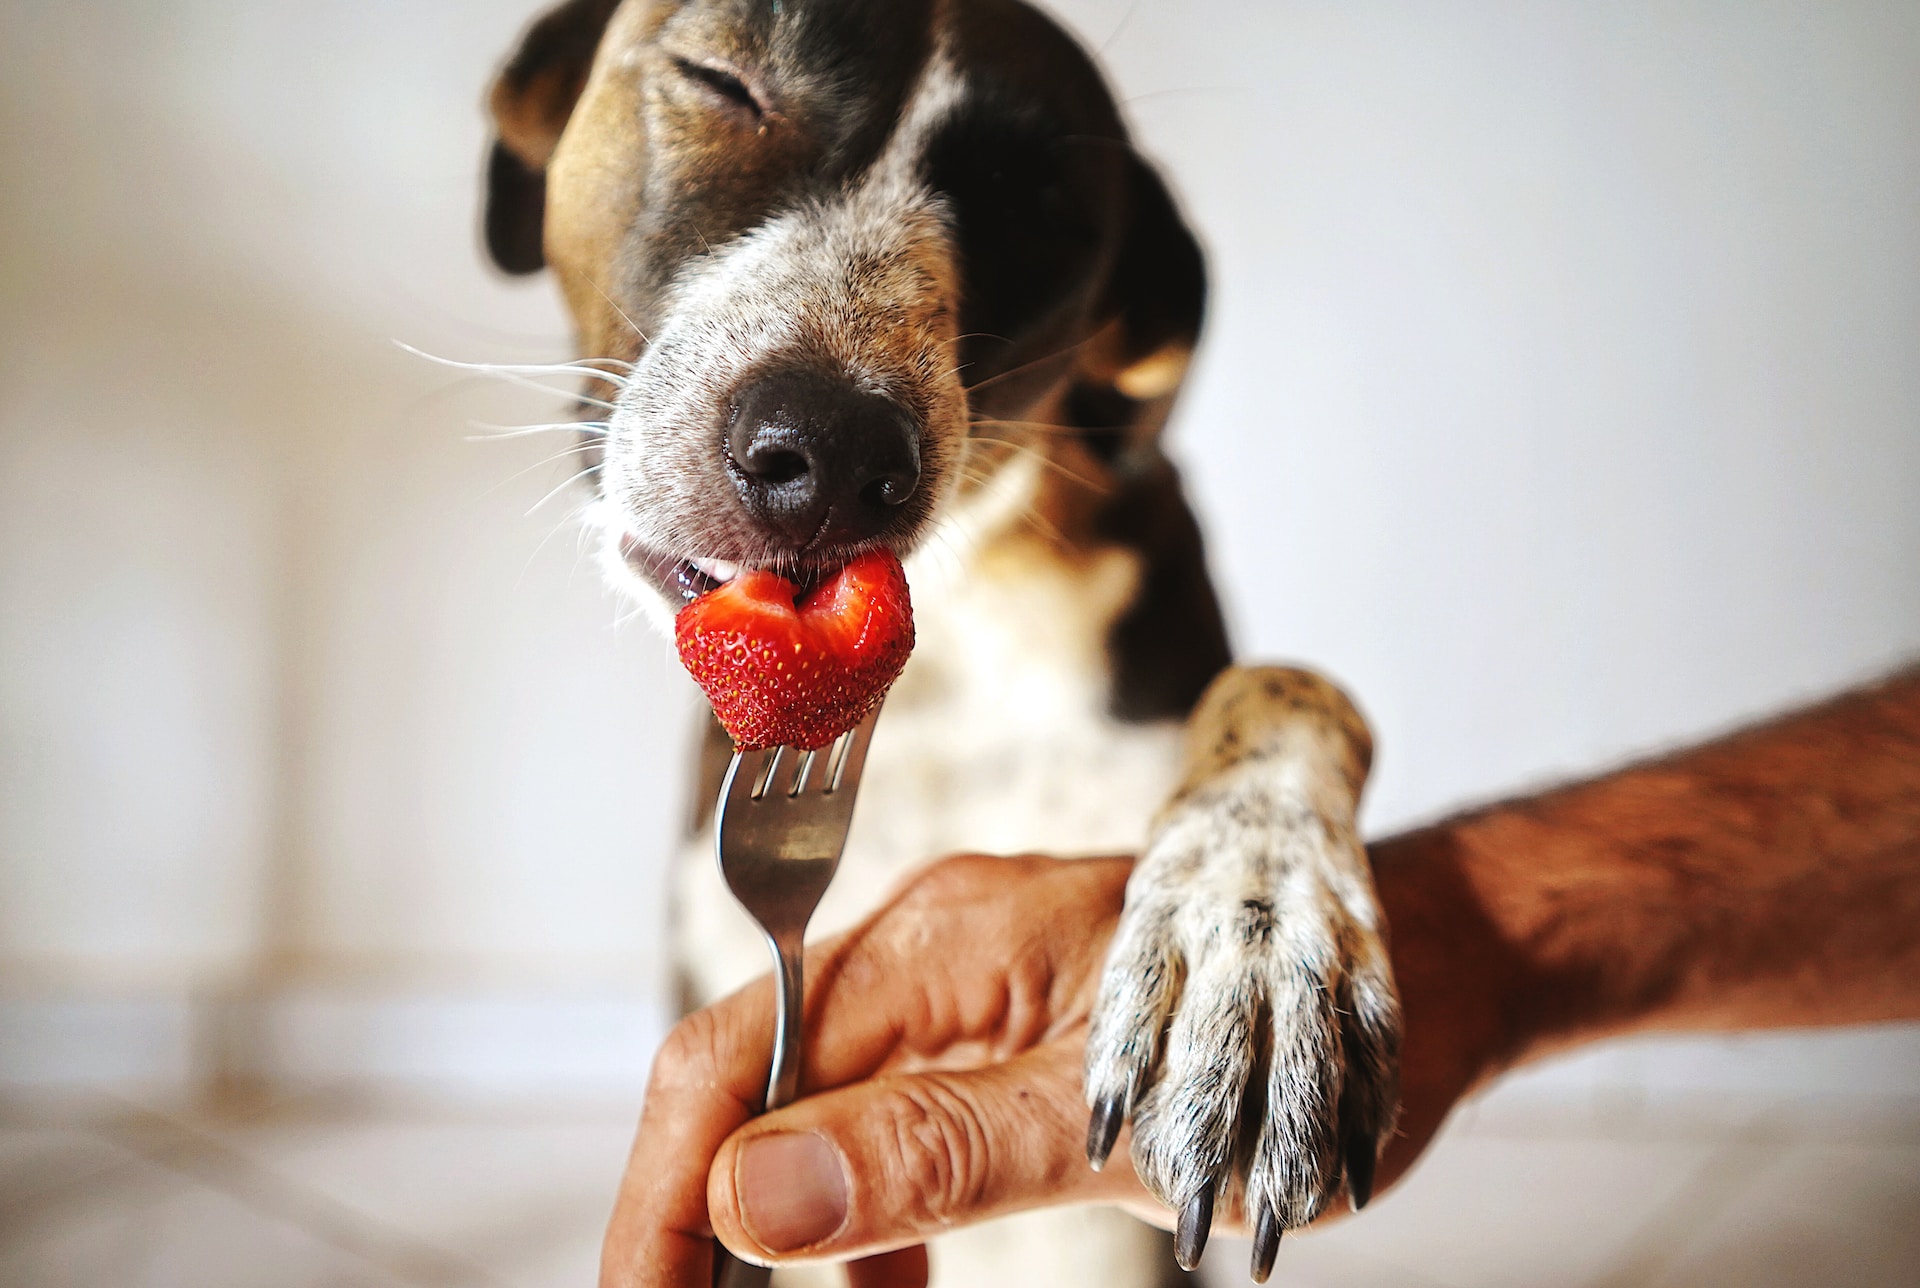 Dog-Safe Snacks and Foods to Avoid